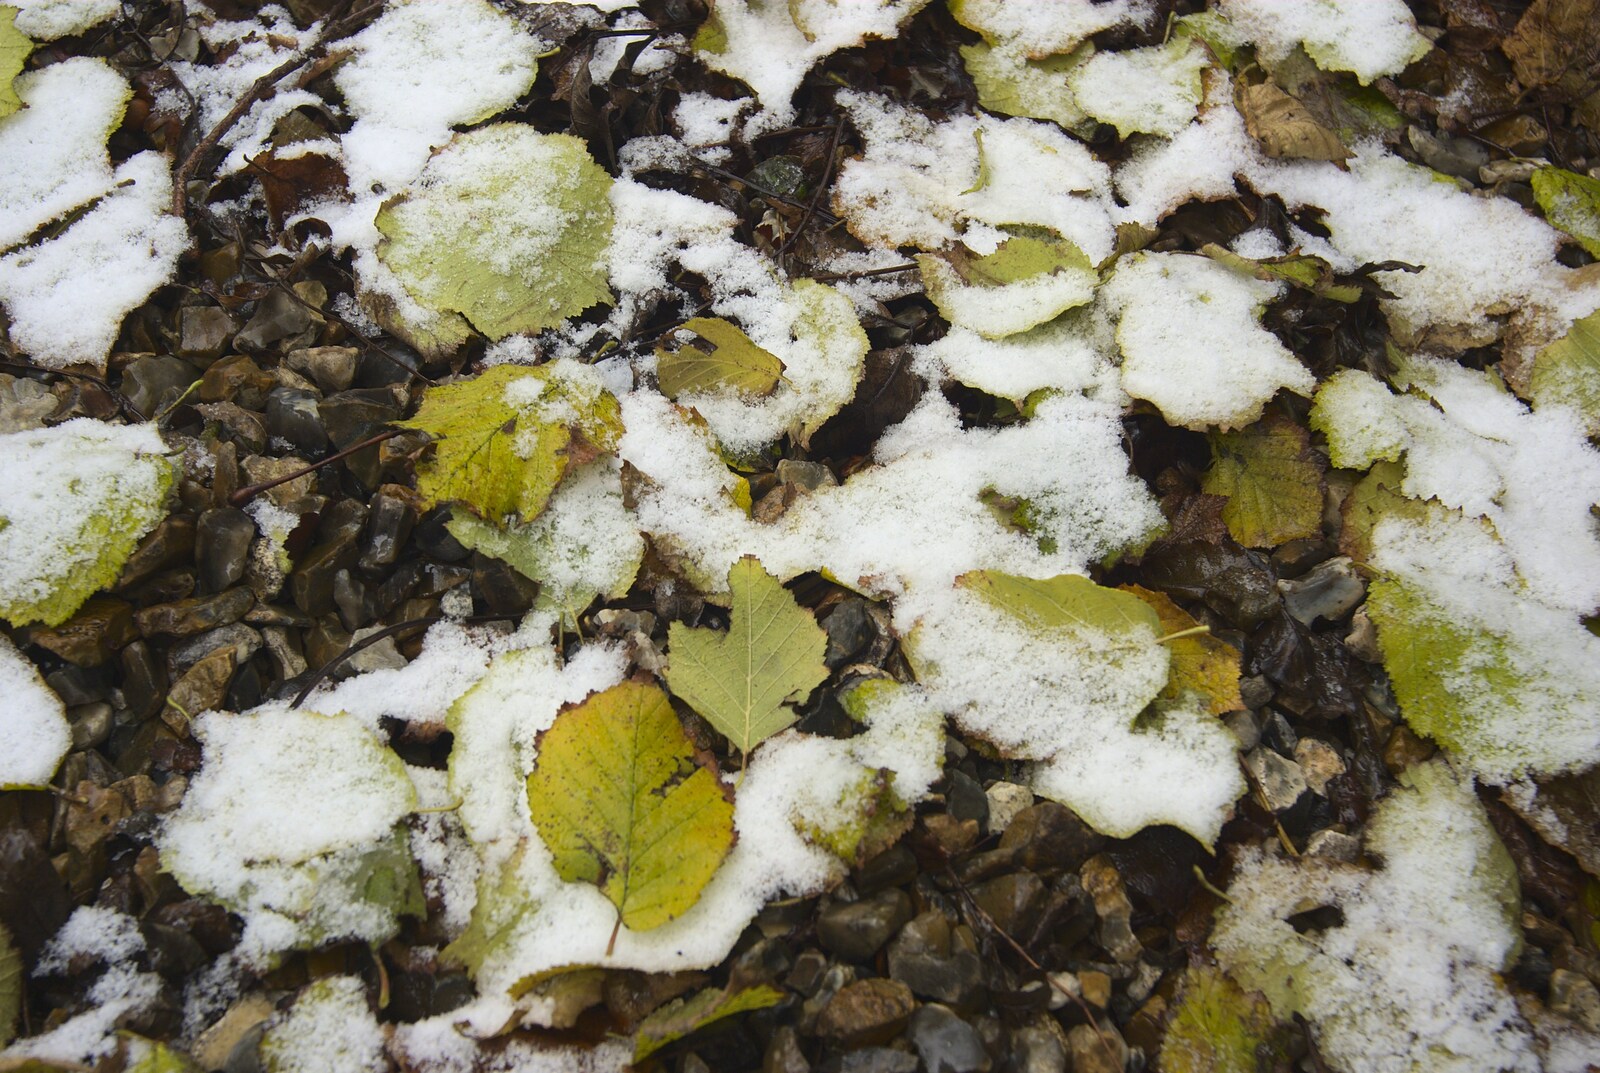 Snow on leaves from Apple Pressing and Amandine's Jazz, Diss, Norfolk - 21st November 2010